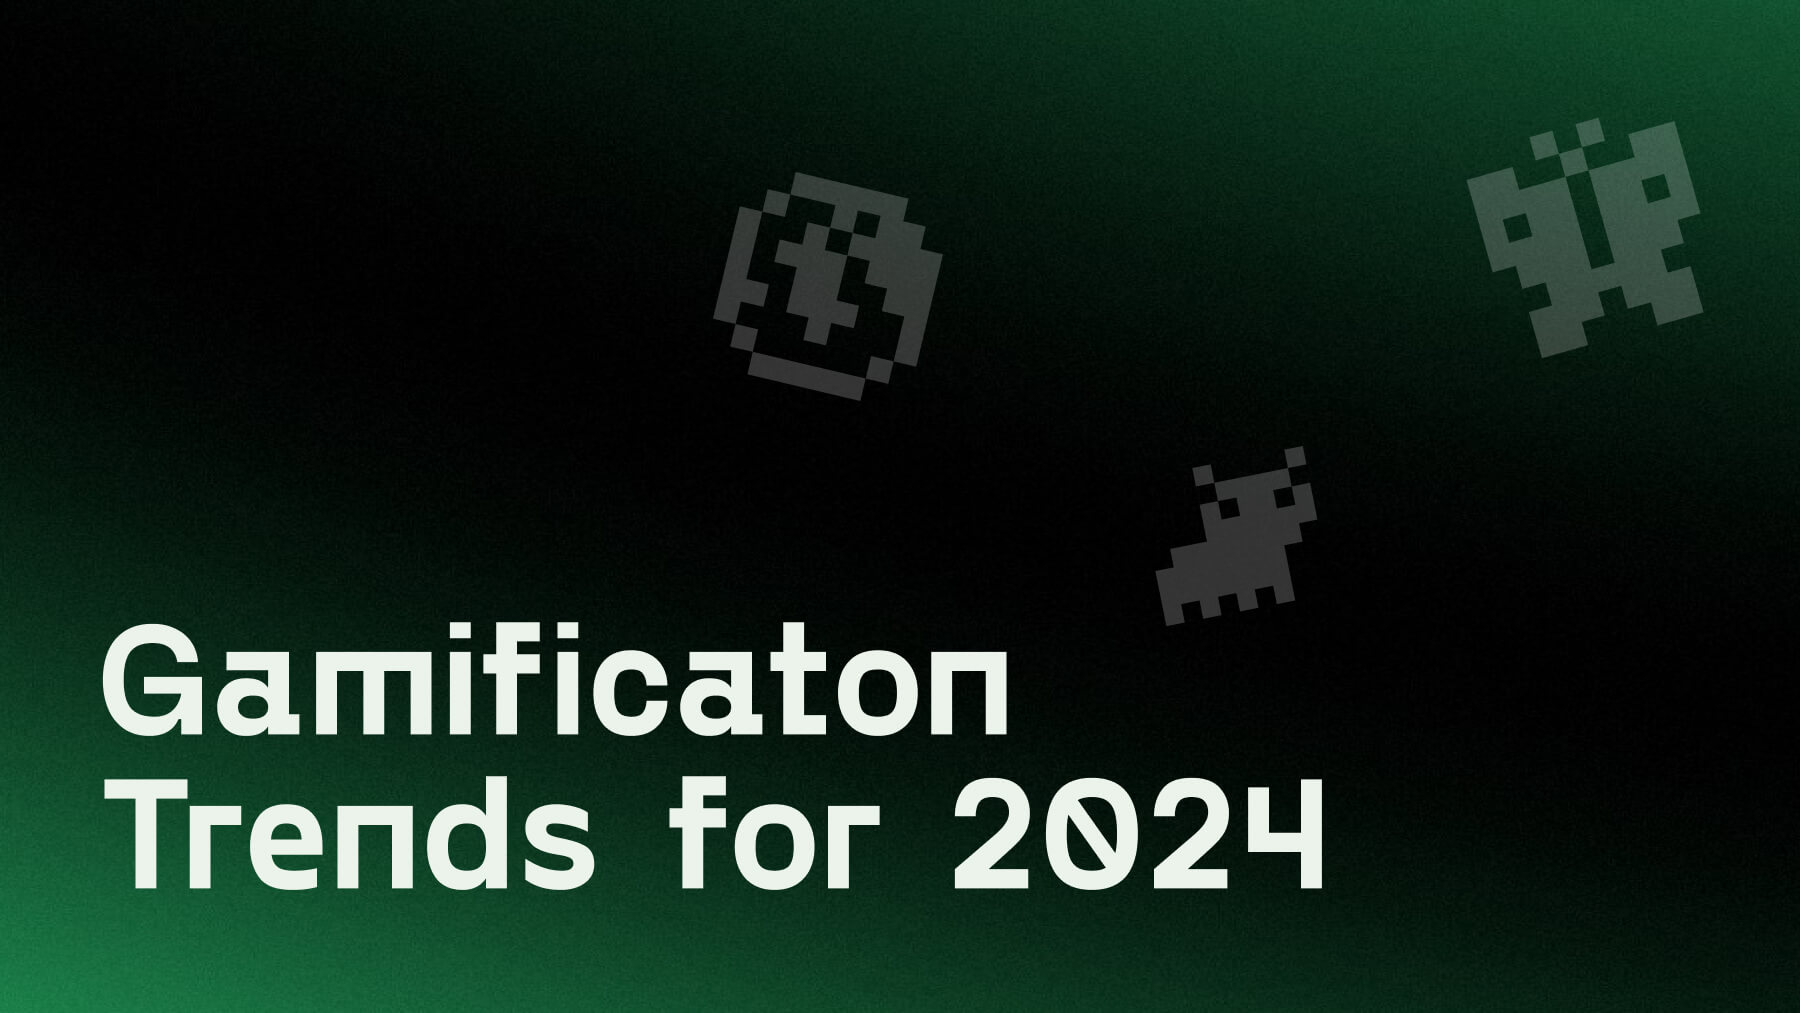 Gamification Trends for 2024